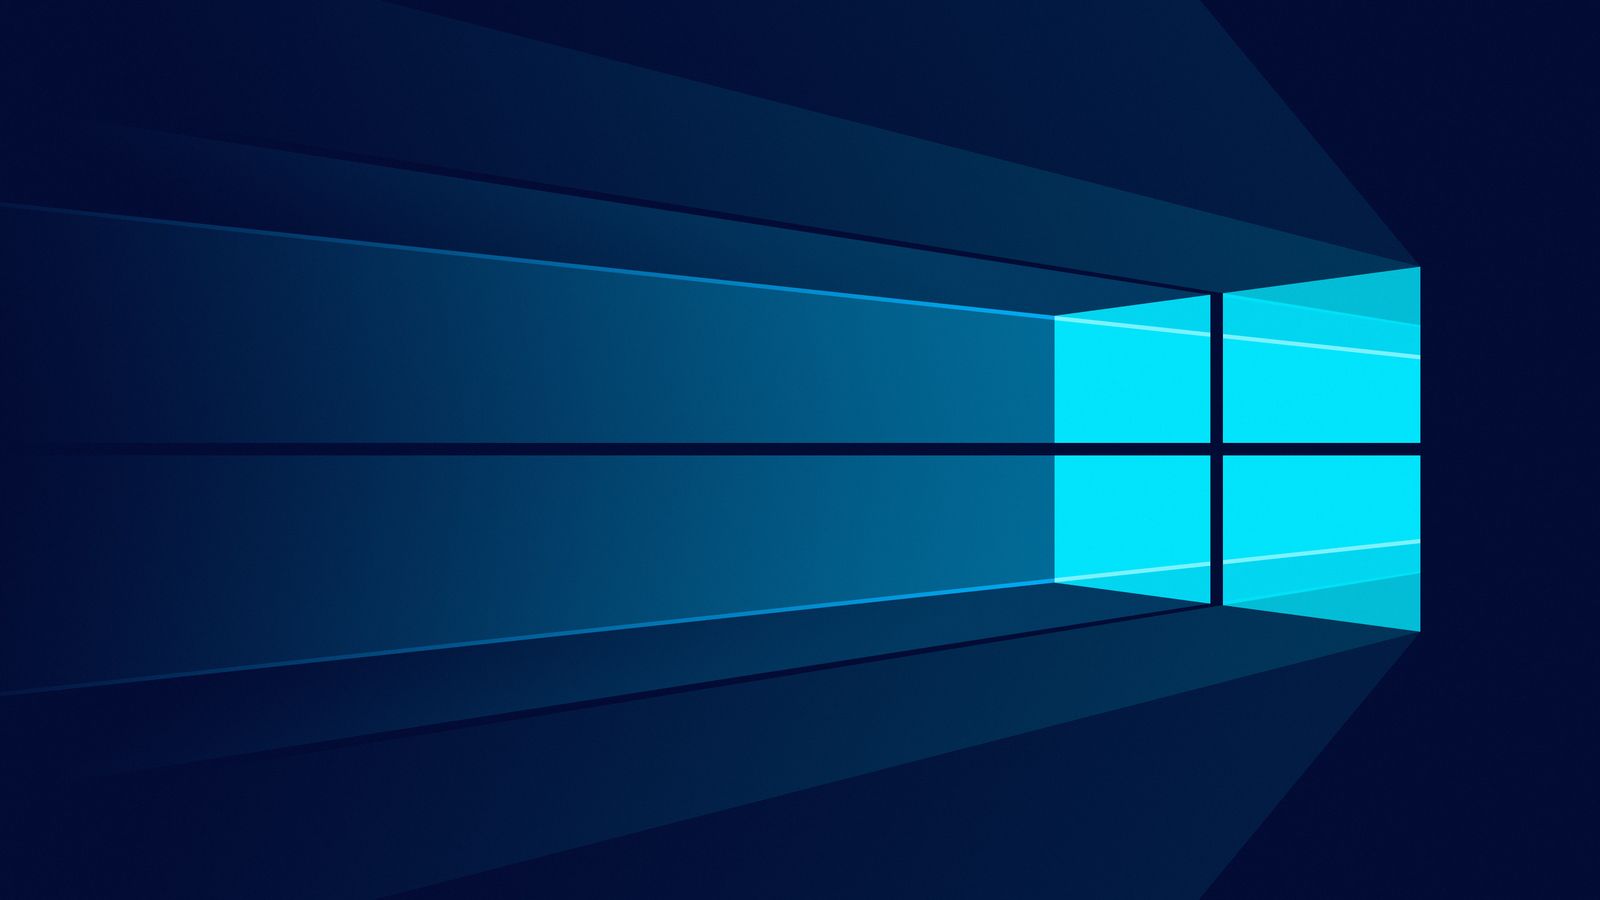 Windows 10 wallpaper for your computer - Windows 10